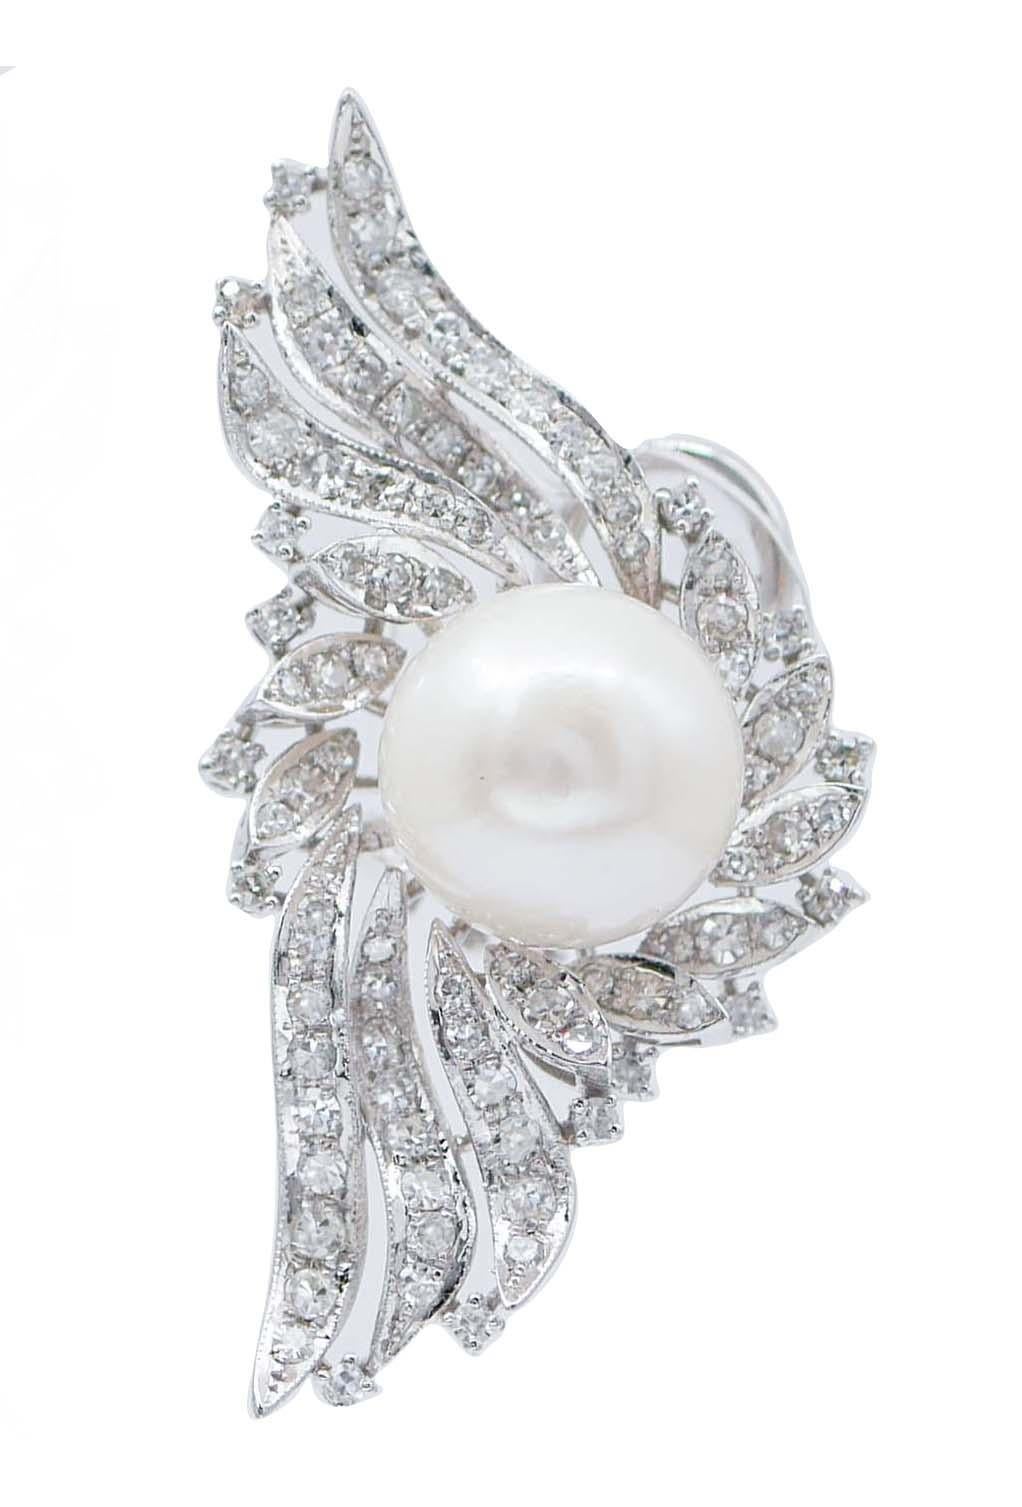 SHIPPING POLICY: 
No additional costs will be added to this order. 
Shipping costs will be totally covered by the seller (customs duties included).

Elegant retrò earrings in 14 kt white gold structure mounted with a central pearl surrounded by